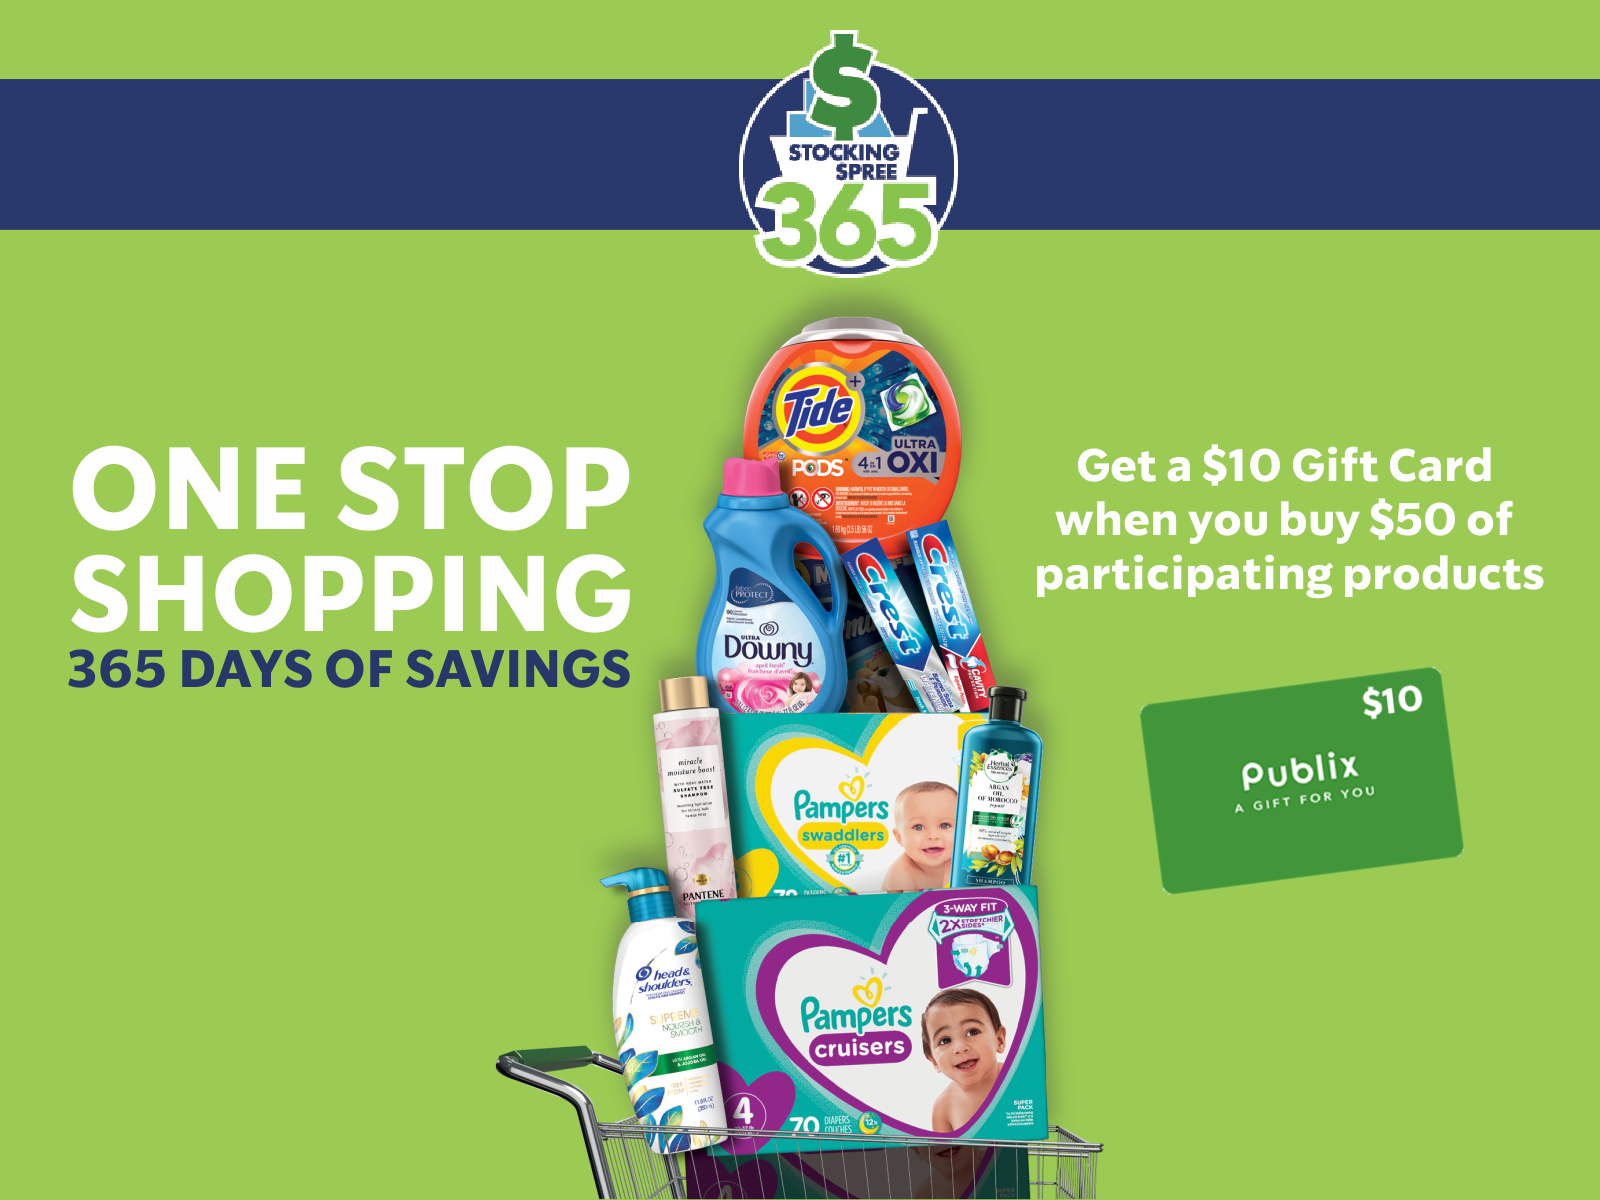 Earn Publix Digital Gift Cards In 24 Hours With The Stocking Spree 365 Program on I Heart Publix 3